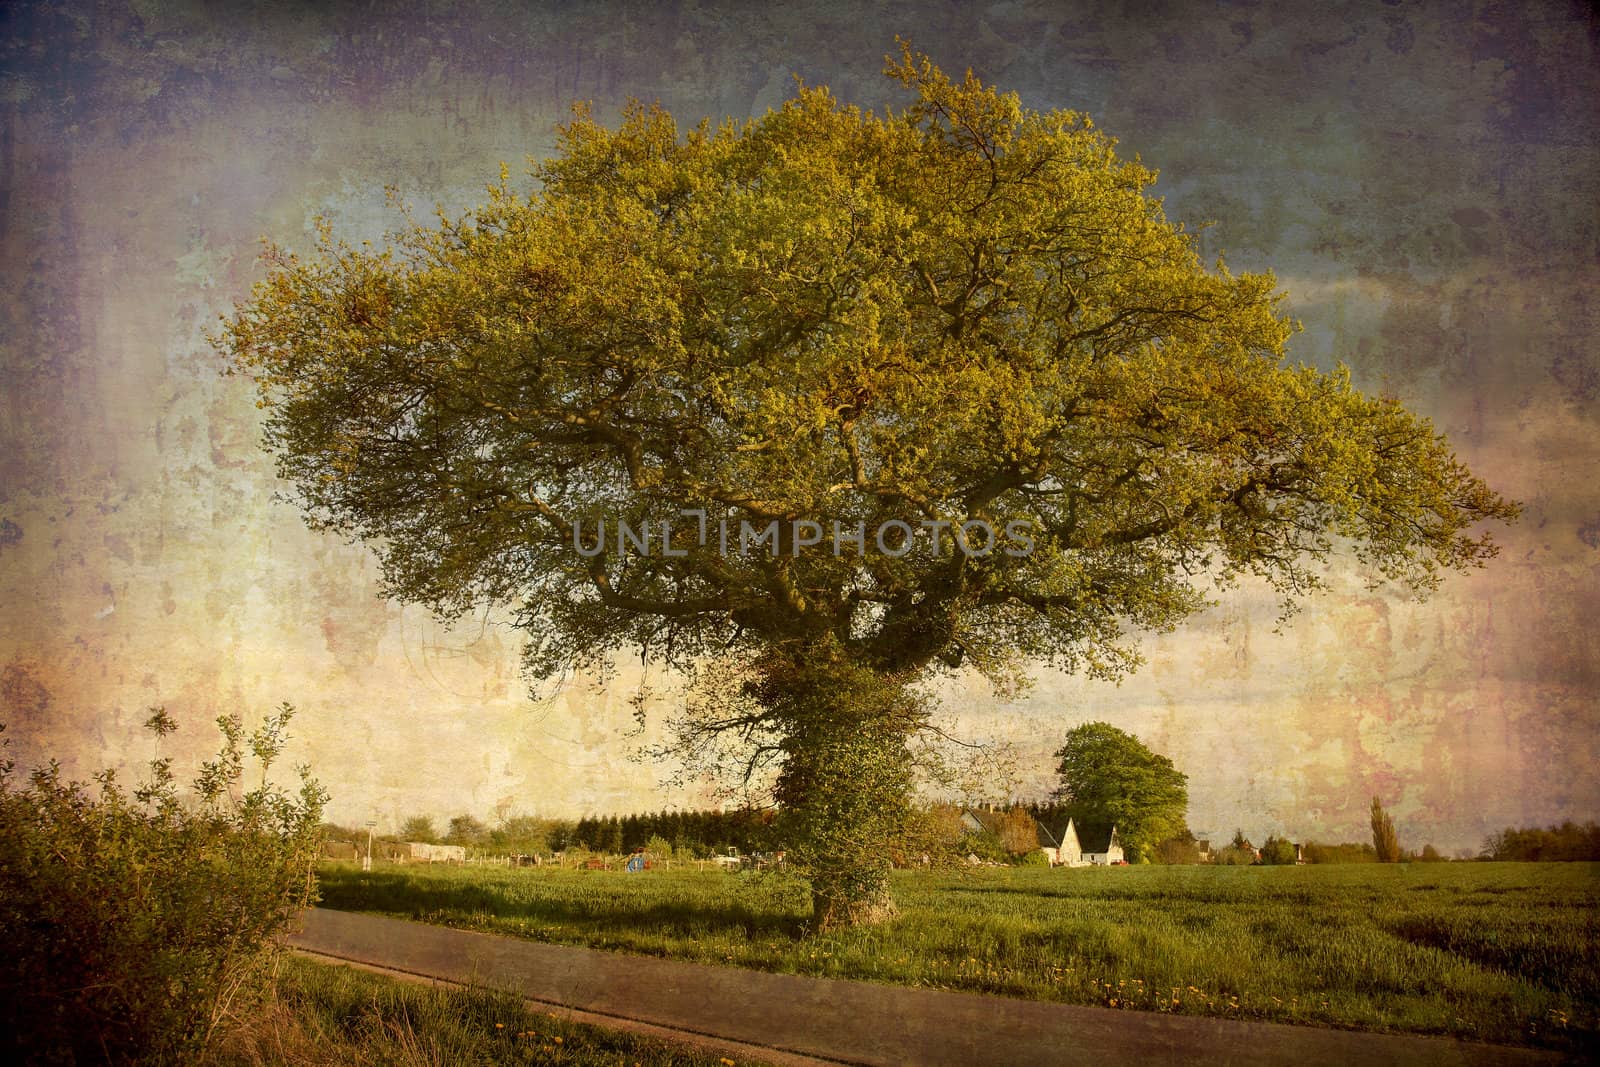 Artistic work of my own in retro style - Postcard from Denmark. - Nice old Oak tree. More of my images worked together to reflect age and time.